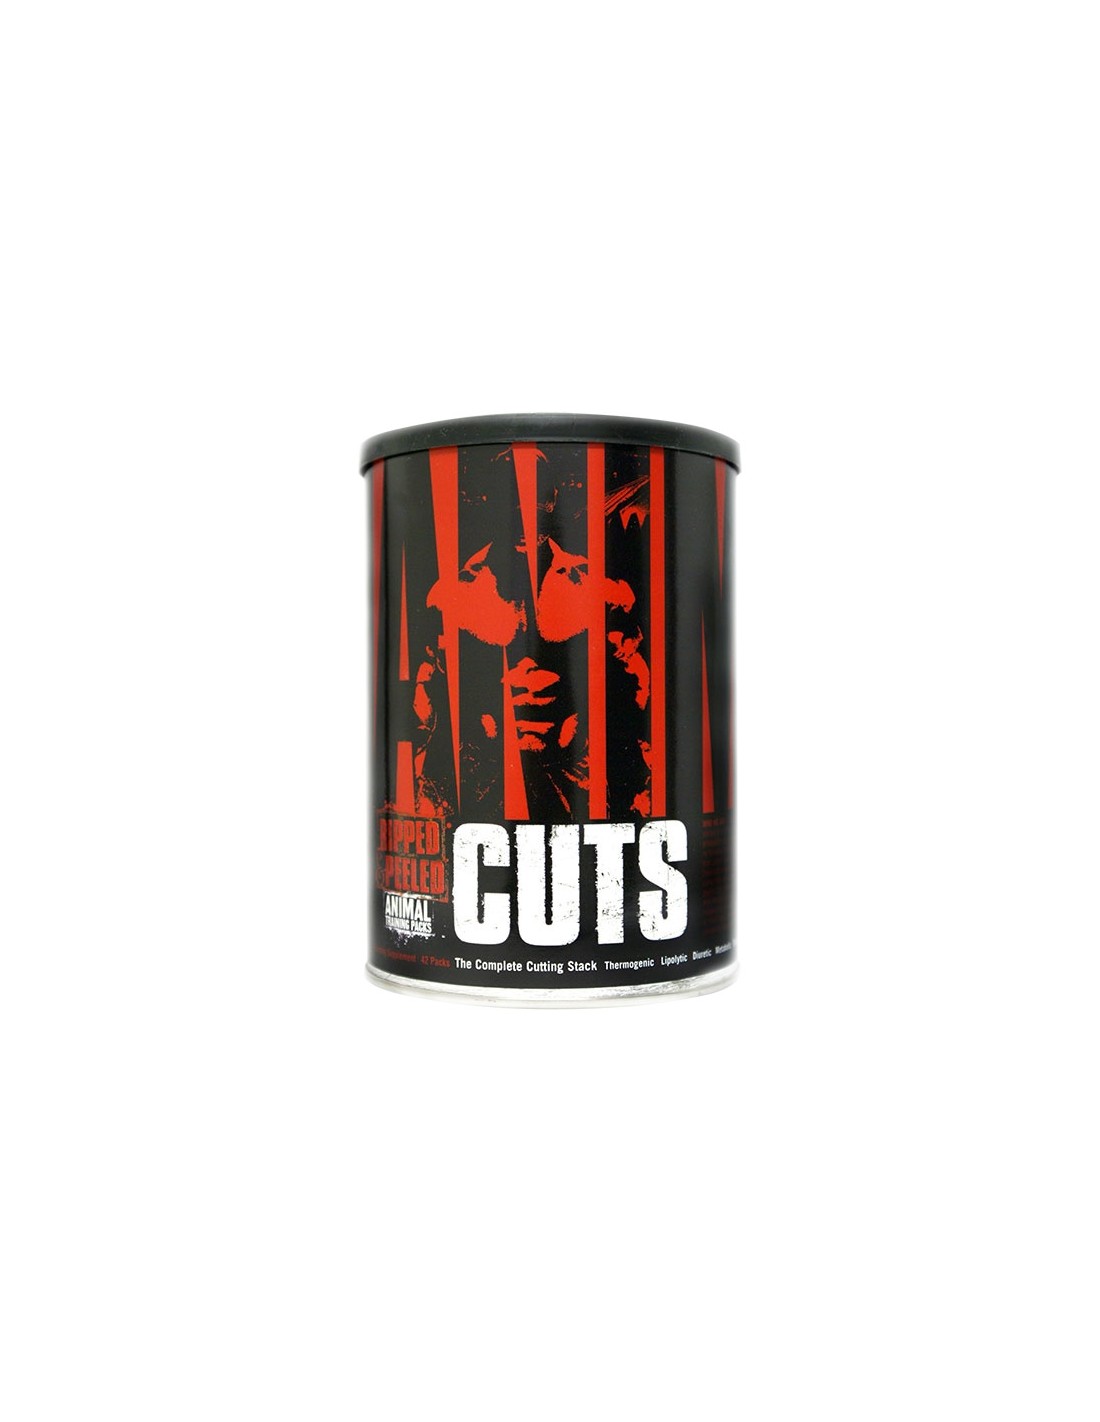 Animal Cuts by Universal Nutrition - Free